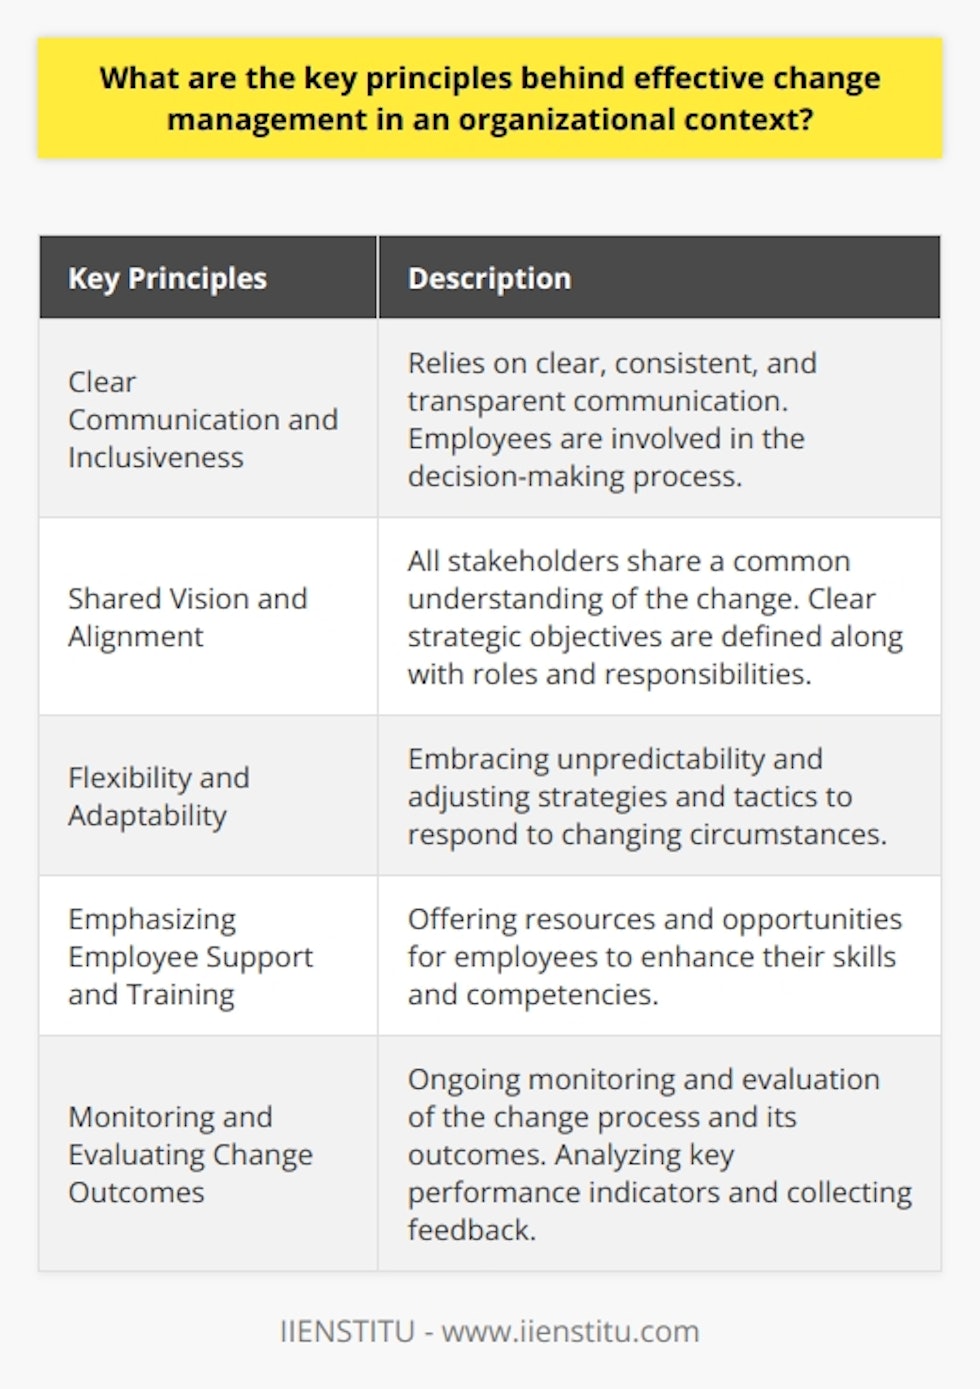 The key principles behind effective change management in an organizational context can be summarized into the following fundamental areas.Clear Communication and Inclusiveness: Effective change management relies on clear, consistent, and transparent communication. It is crucial to clearly convey the reasons for change, the desired outcomes, and the process through which the change will be implemented. Furthermore, involving employees in the decision-making process fosters a sense of inclusiveness, increases their buy-in, and enhances the overall success of the change initiative.Shared Vision and Alignment: To ensure successful change management, it is essential for all stakeholders to share a common vision and understanding of the change. This can be achieved by defining strategic objectives, expected benefits, and clearly defining the roles and responsibilities of all team members. When leadership and employees are aligned, it creates a collaborative environment where everyone can work towards the common goal of implementing change effectively.Flexibility and Adaptability: Change processes often involve unpredictability and unforeseen challenges. Therefore, embracing flexibility and adaptability is crucial for effective change management. Organizations must regularly evaluate the progress and outcomes of the change initiative and adjust strategies and tactics accordingly. Maintaining an agile mindset allows organizations to respond and adapt to changing circumstances, increasing the likelihood of successful change implementation.Emphasizing Employee Support and Training: Change initiatives often require employees to develop new skills or adopt new ways of working. Providing adequate support and training significantly increases the likelihood of change management success. Organizations should offer resources and opportunities for employees to enhance their competencies, ensuring they are fully prepared to implement and sustain the desired changes.Monitoring and Evaluating Change Outcomes: Effective change management necessitates ongoing monitoring and evaluation of the change process and its outcomes. Analyzing key performance indicators and collecting feedback from stakeholders allows organizations to assess the effectiveness of their change initiatives. This iterative approach enables organizations to continuously refine and enhance their change management strategies, maximizing the likelihood of successful change implementation.In conclusion, effective change management in an organizational context requires clear communication, inclusiveness, a shared vision and alignment, flexibility and adaptability, employee support and training, and ongoing monitoring and evaluation. By following these key principles, organizations can navigate the complexities of change and achieve optimal outcomes for all stakeholders.